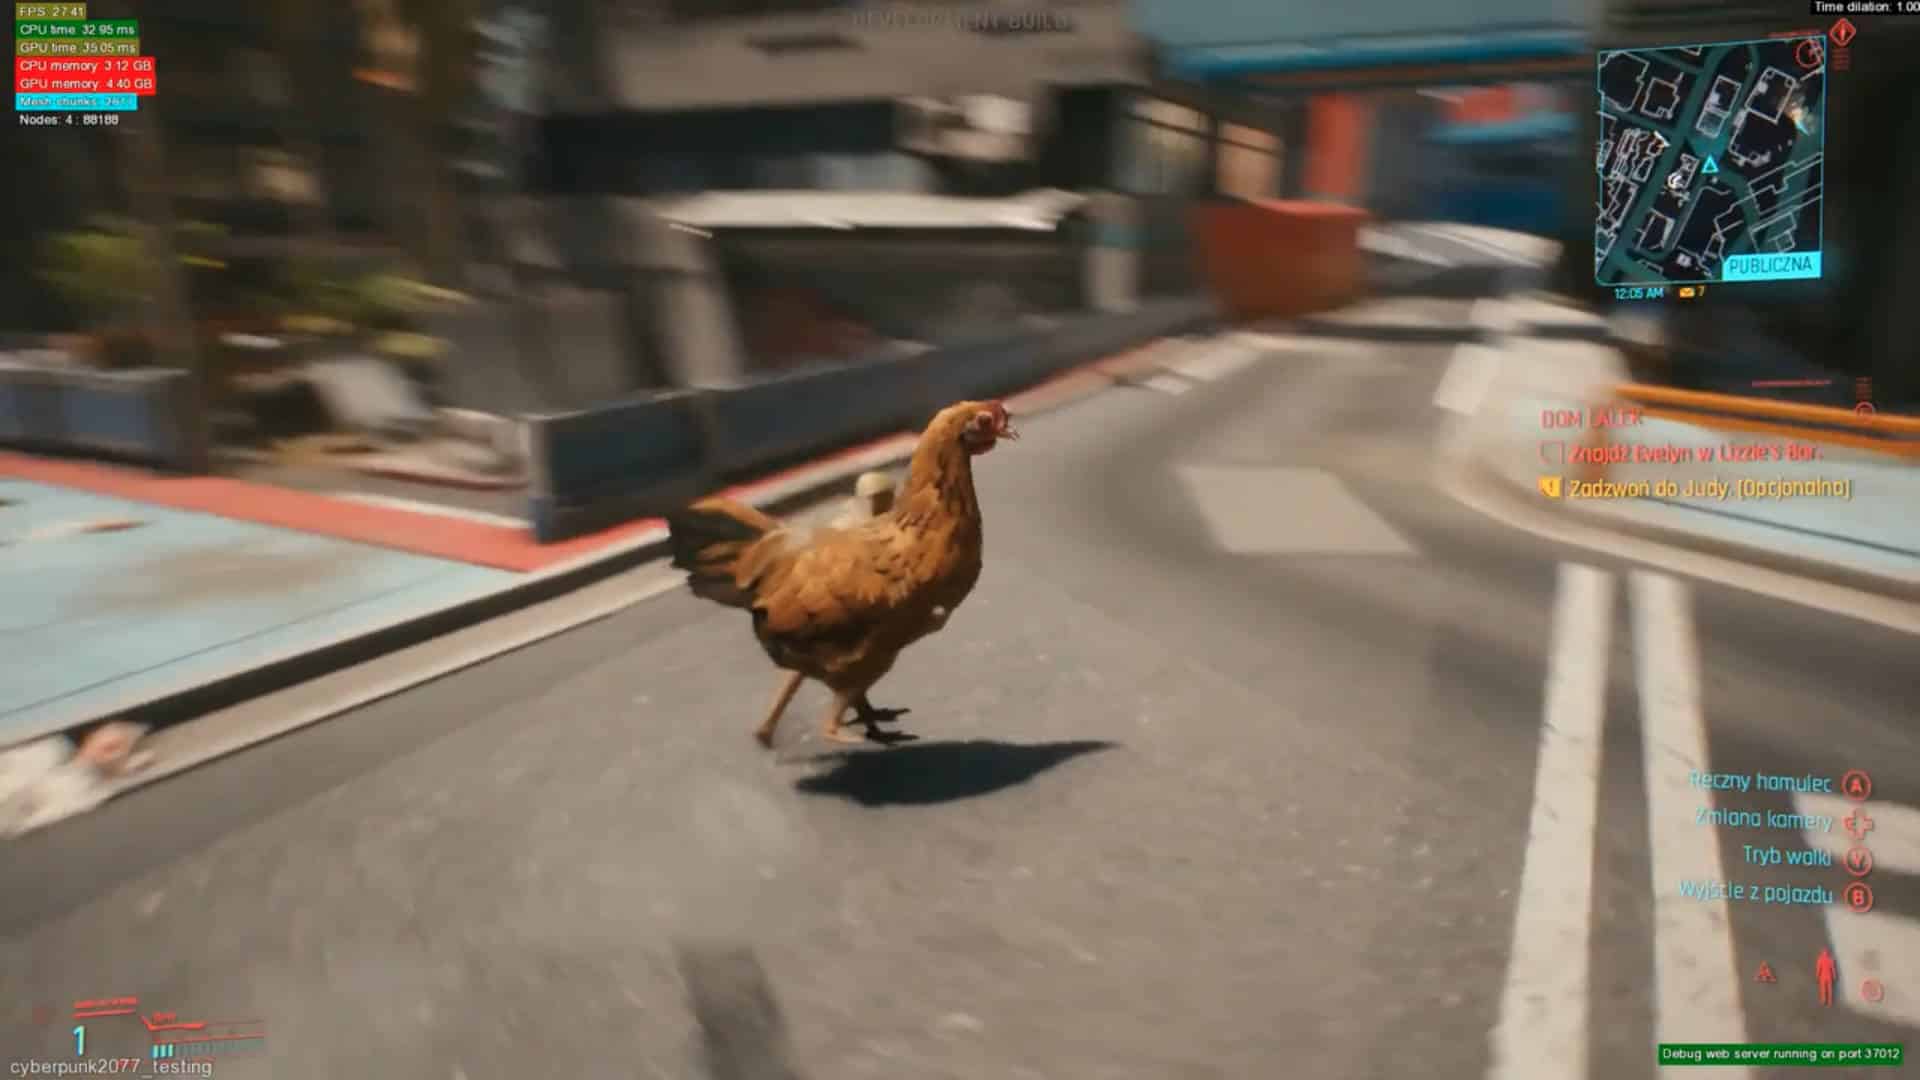 Cyberpunk 2077 Alpha Footage Leaks Online and Includes NSFW Content and Riding a Chicken